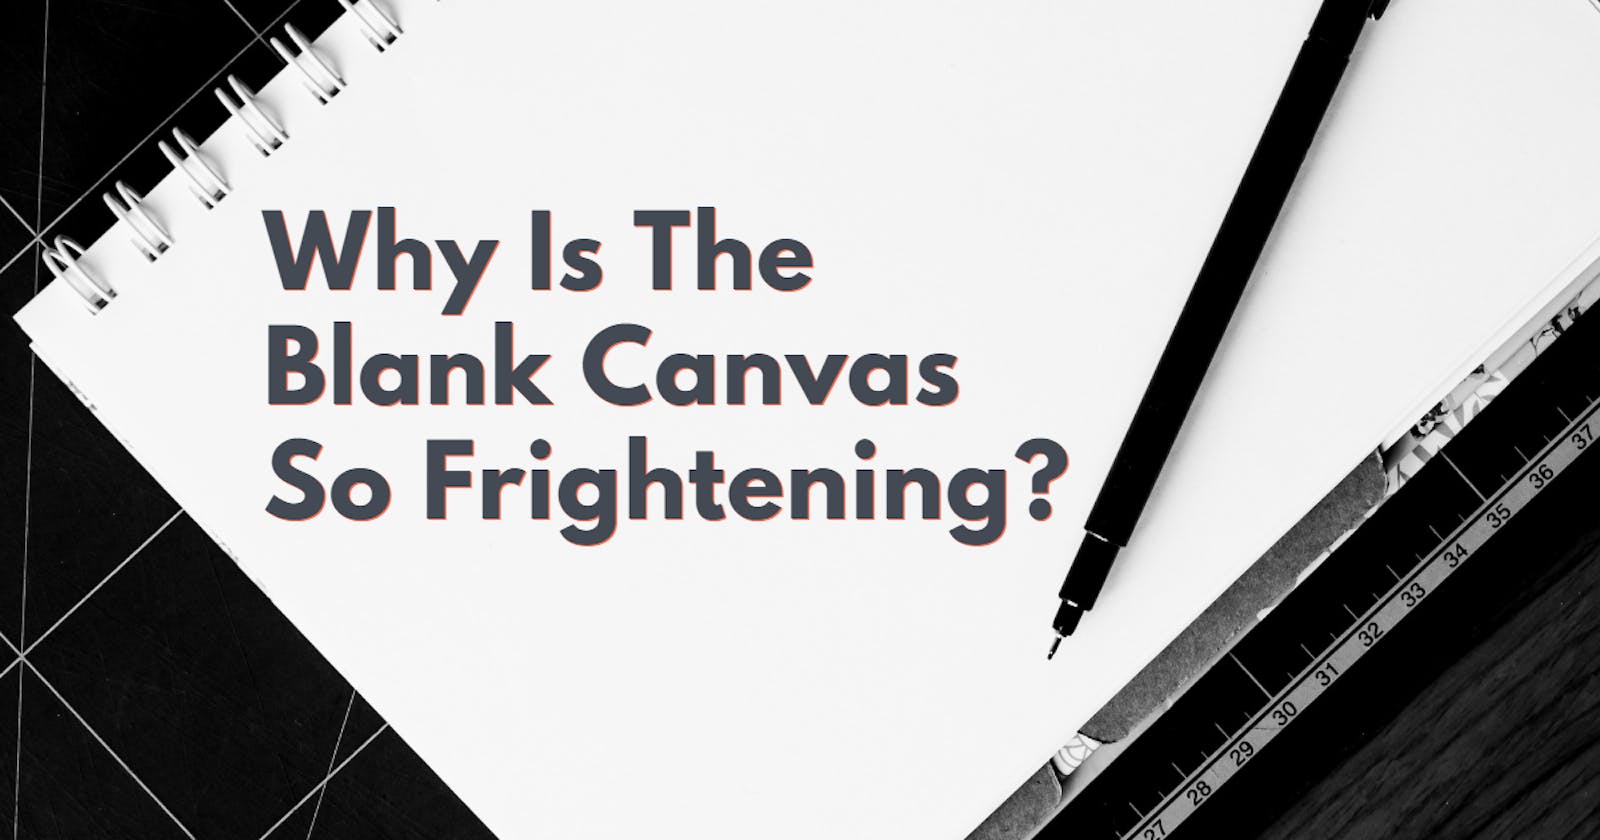 Why Is The Blank Canvas So Frightening?